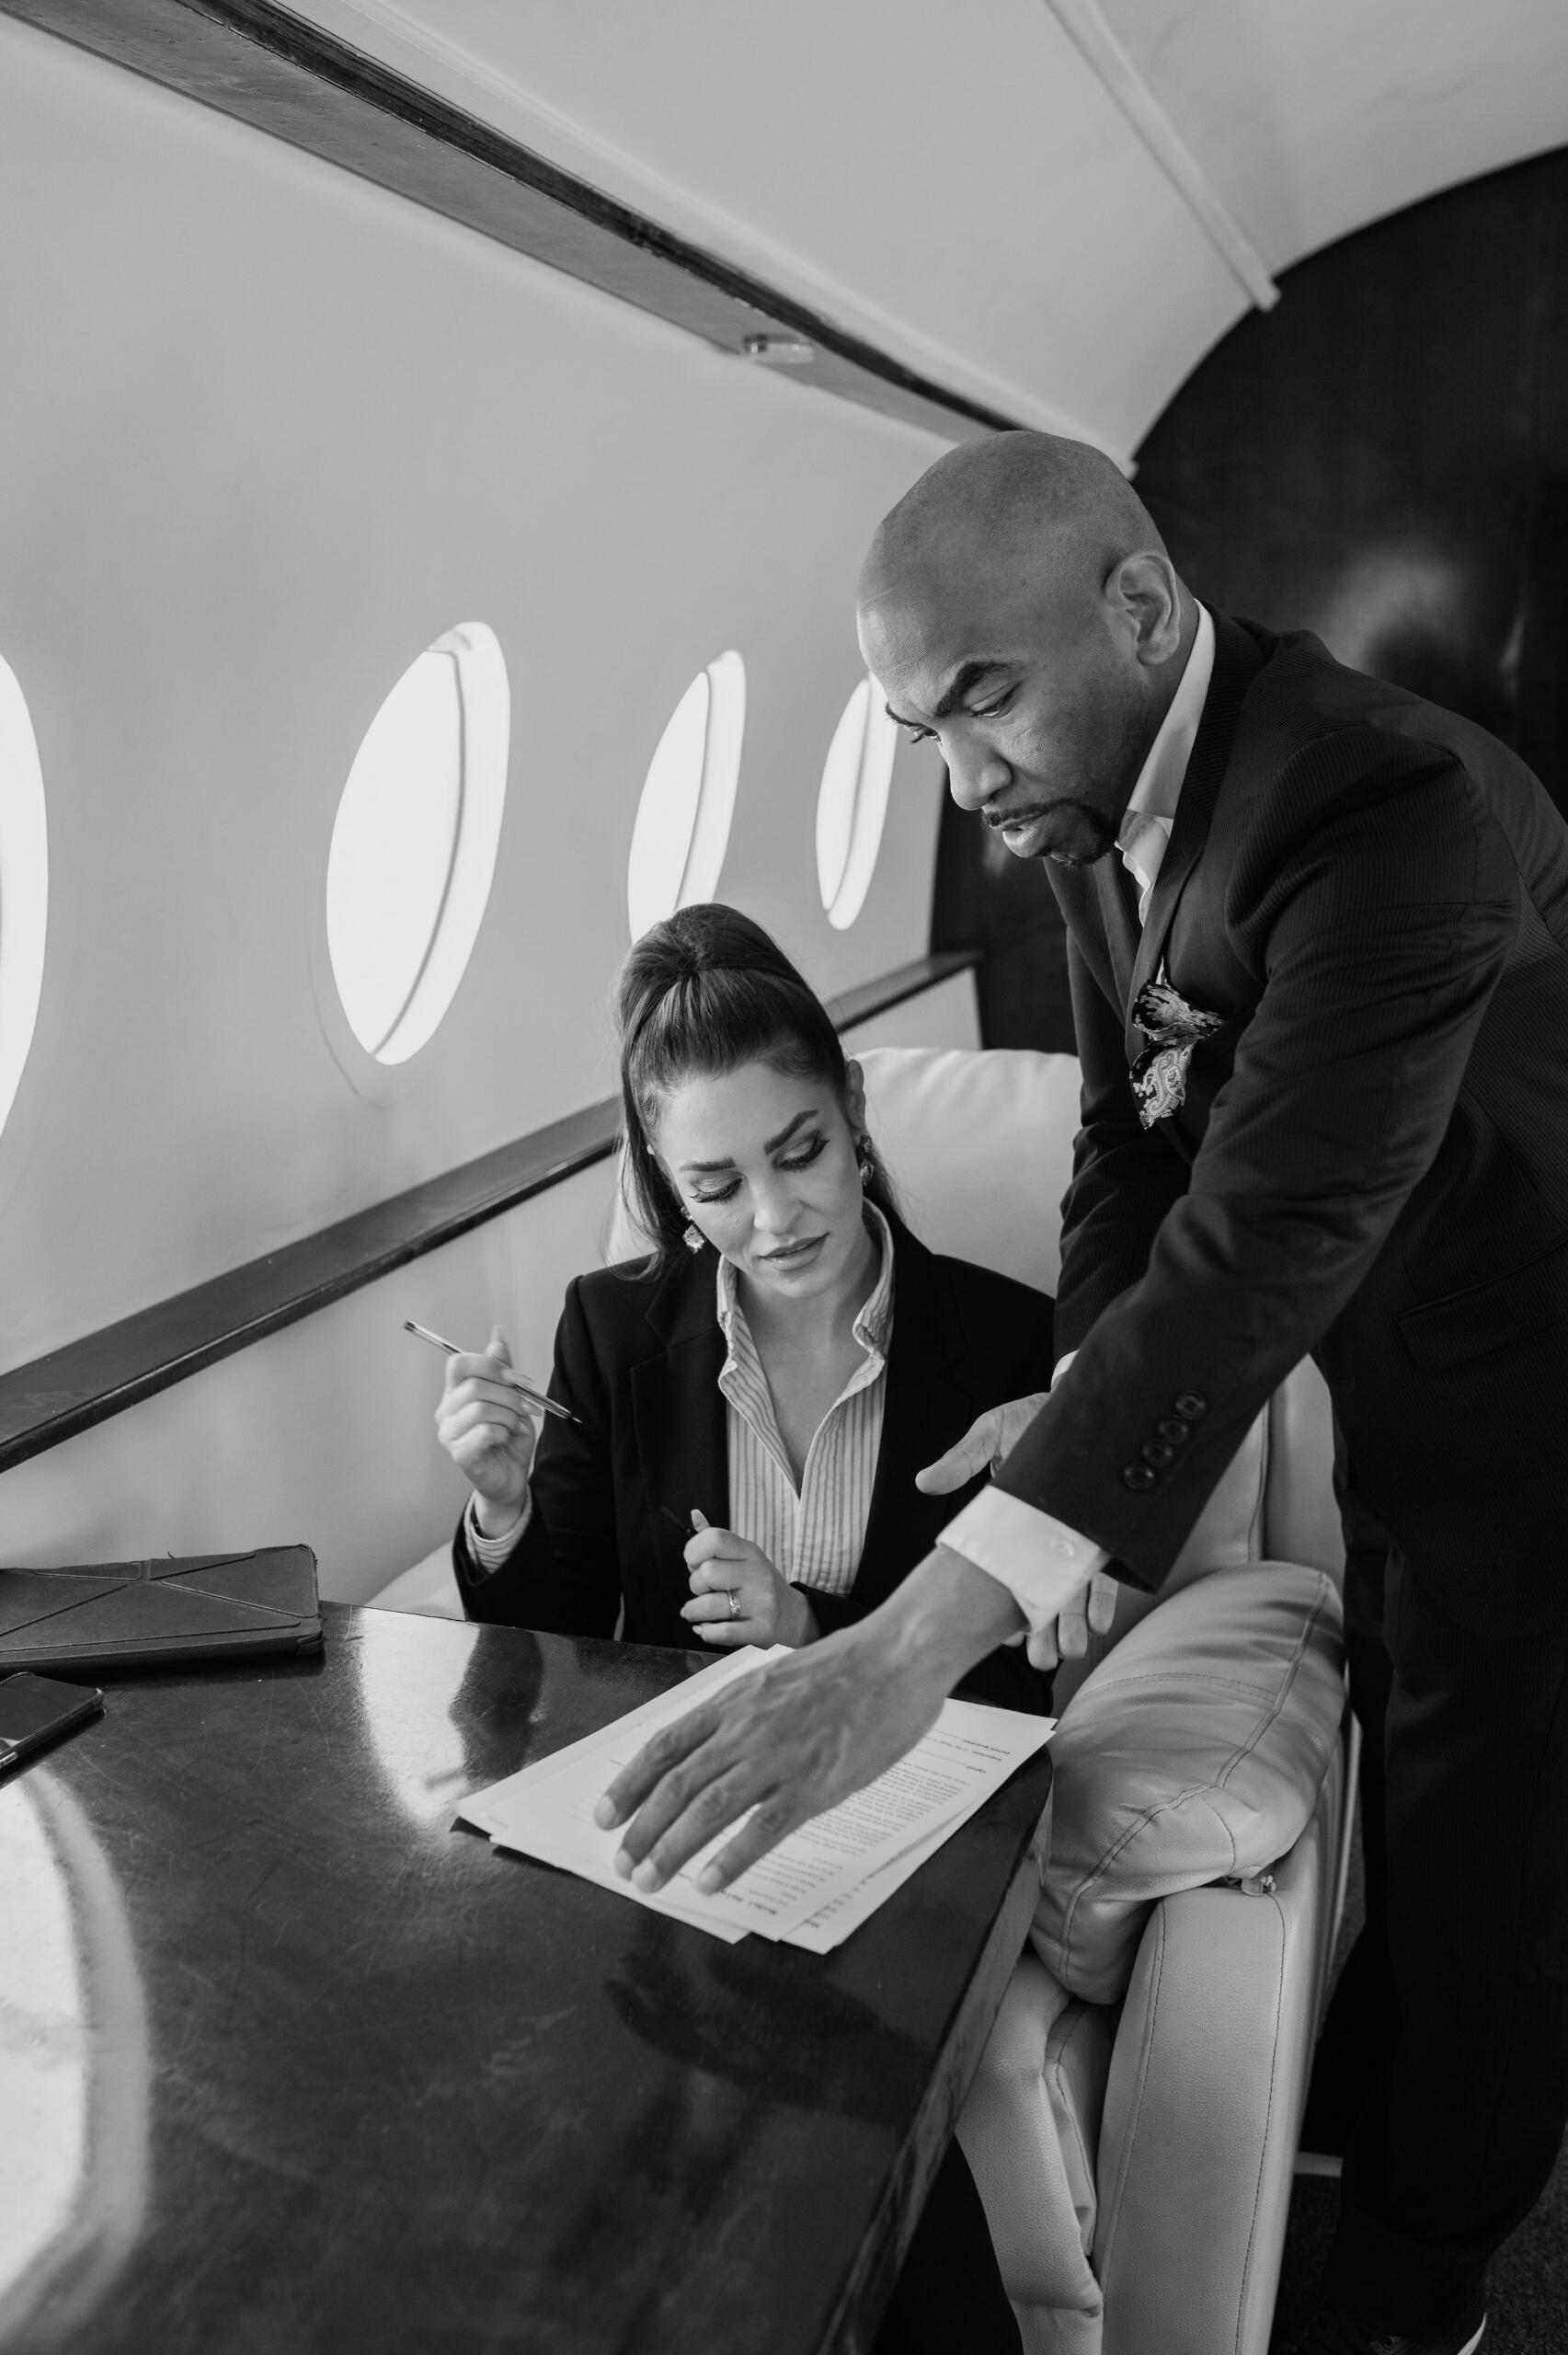 Client and Concierge preparing paperwork in a private jet